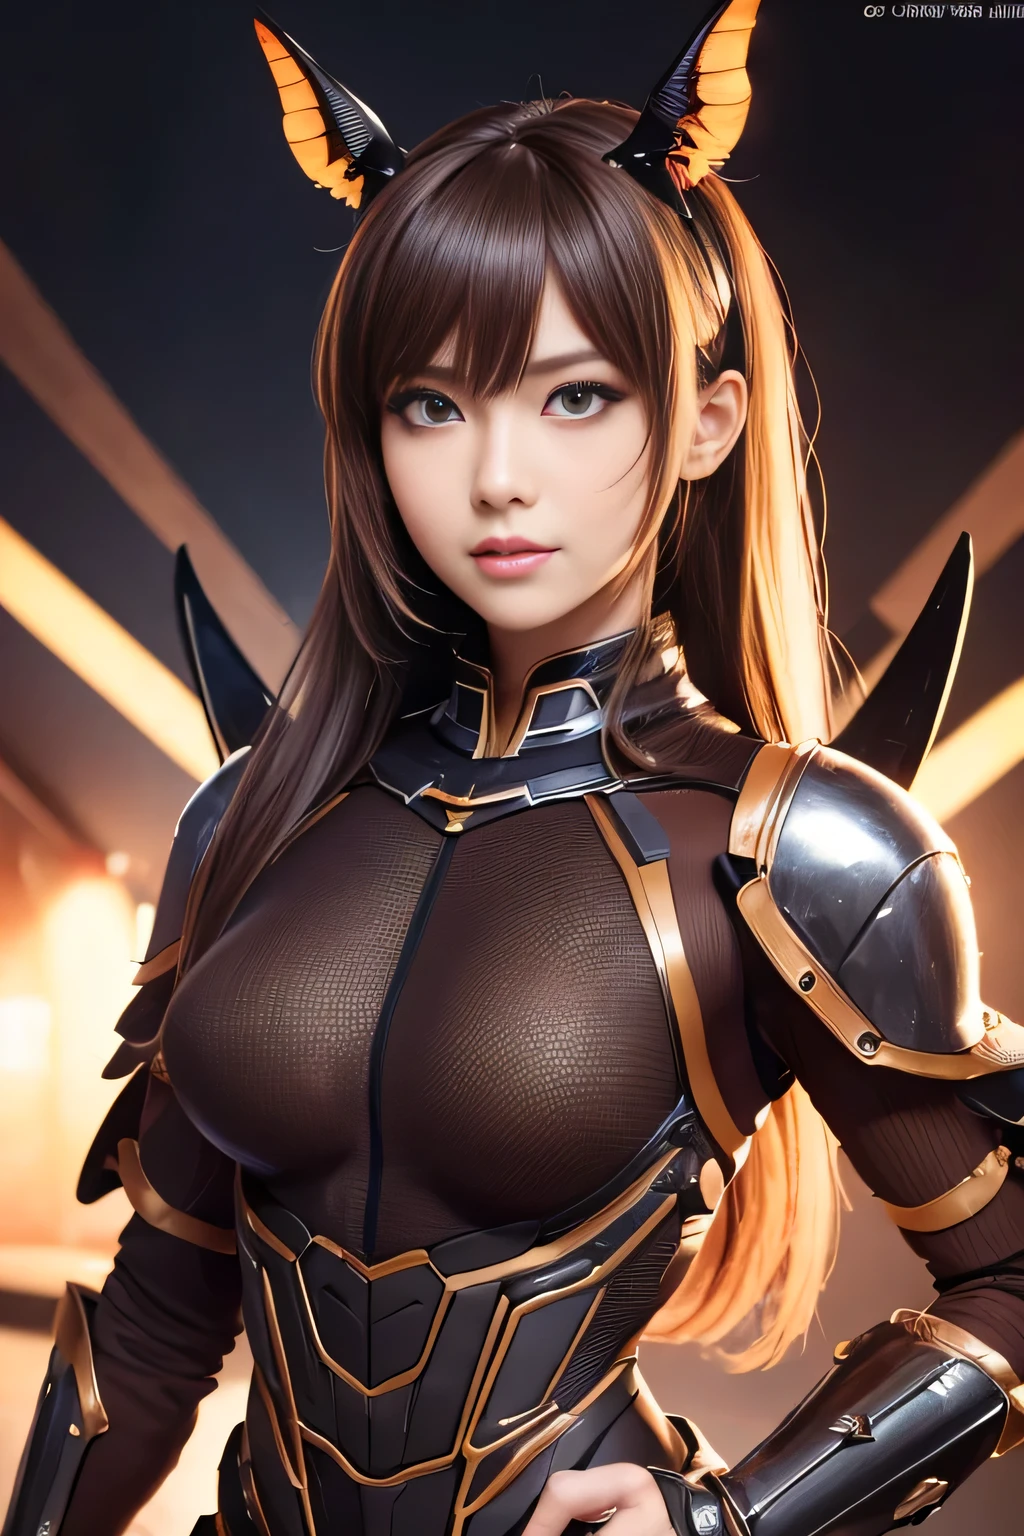 (High resolution,masterpiece,highest quality,Very detailed CG, anime, official art:1.4), realistic, photograph, amazing detail, all complicated, luster and luster,great many layers, 8k wallpaper, 3D, sketch, cute, figure,( alone:1.4), perfect female proportions,villain&#39;s daughter, (Fusion of dark brown cockroach and lady:1.4), (brown cockroach form lady:1.2), (brown cockroach woman:1.2), (Fusion:1.2), (alone:1.4), (evil smile:1.2), muscular, abs, (Cockroach brown exoskeleton bio insect suit:1.4), (Cockroach brown exoskeleton bio insect armor:1.2), (brown transparent cockroach feathers:1.4), (brown cockroach antenna:1.3),